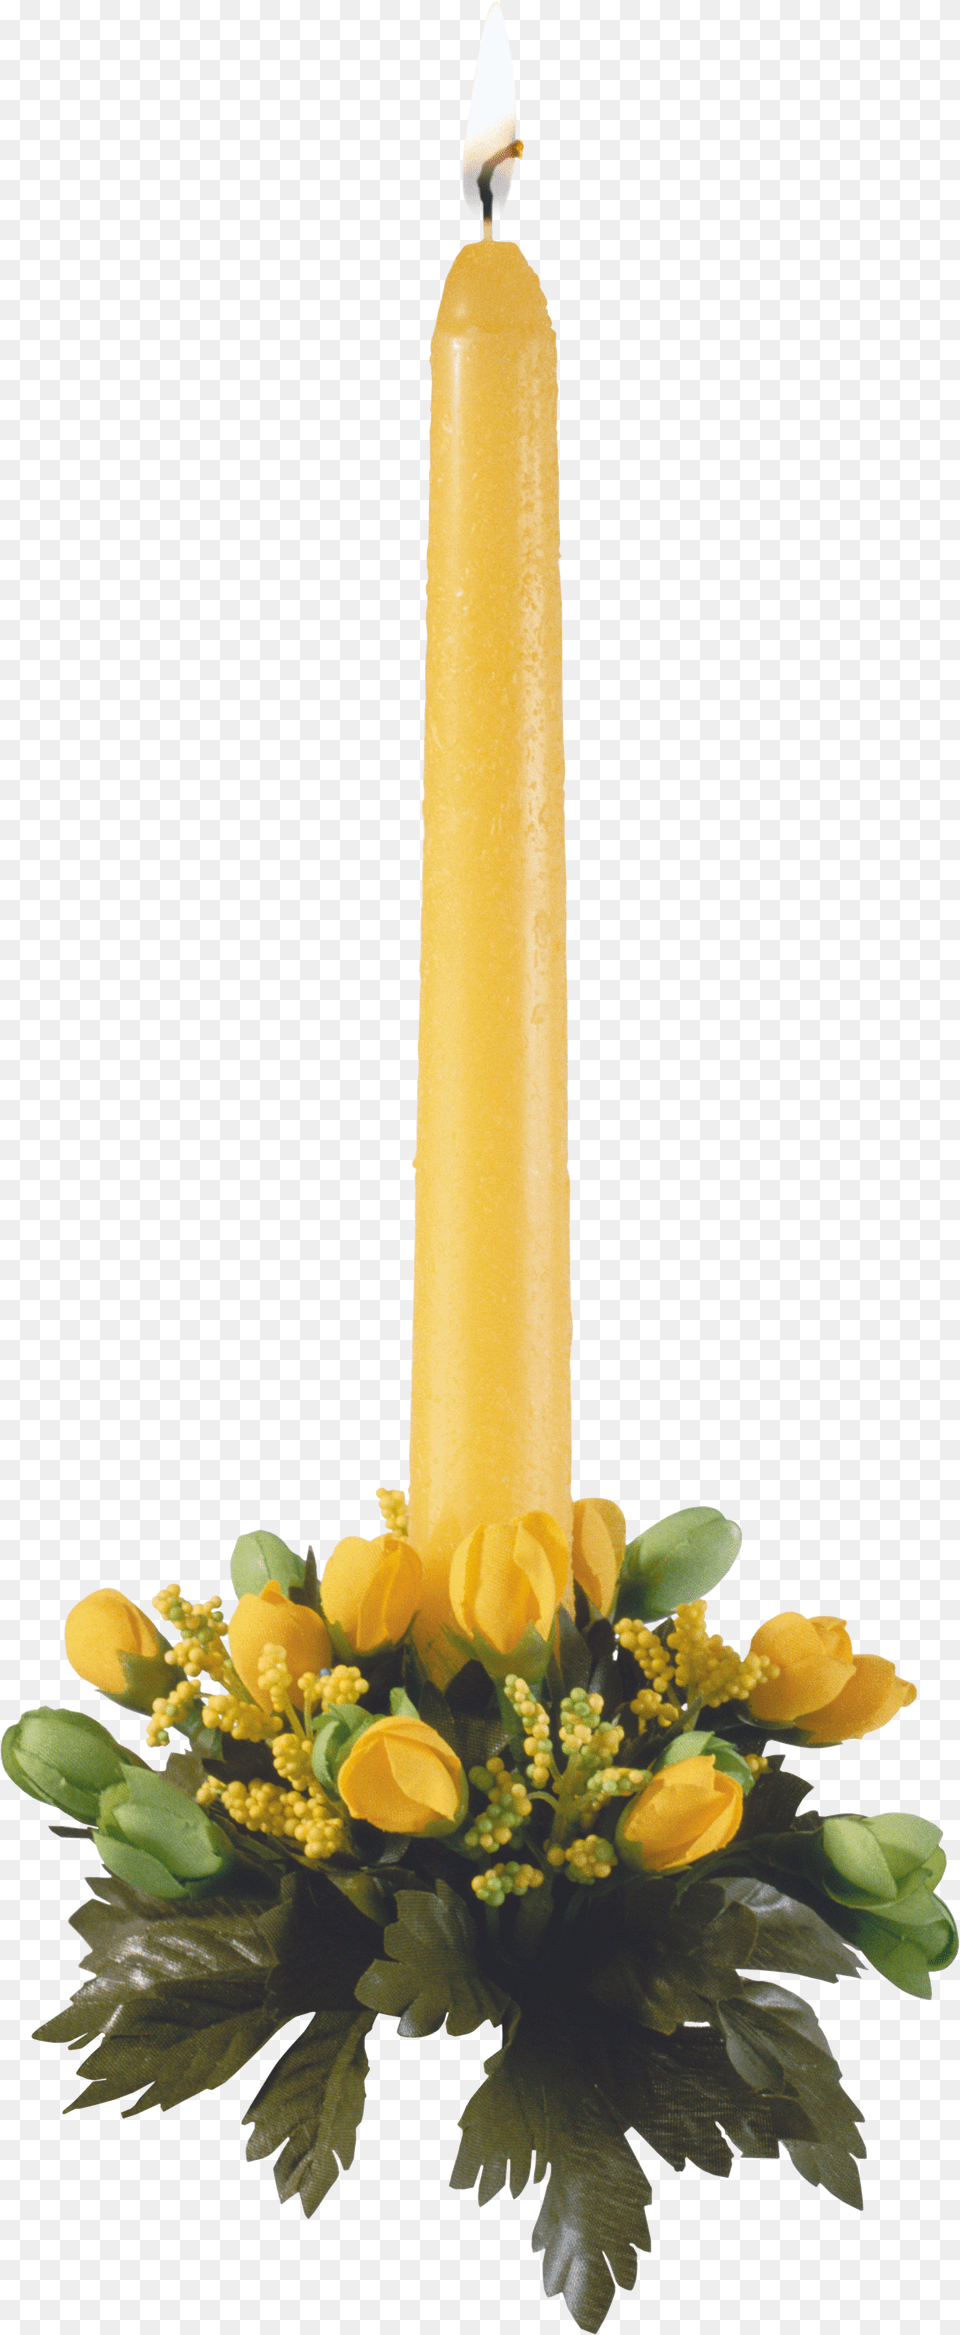 Yellow Christmas Candle Image Christmas Candle, Flower, Flower Arrangement, Plant, Flower Bouquet Free Png